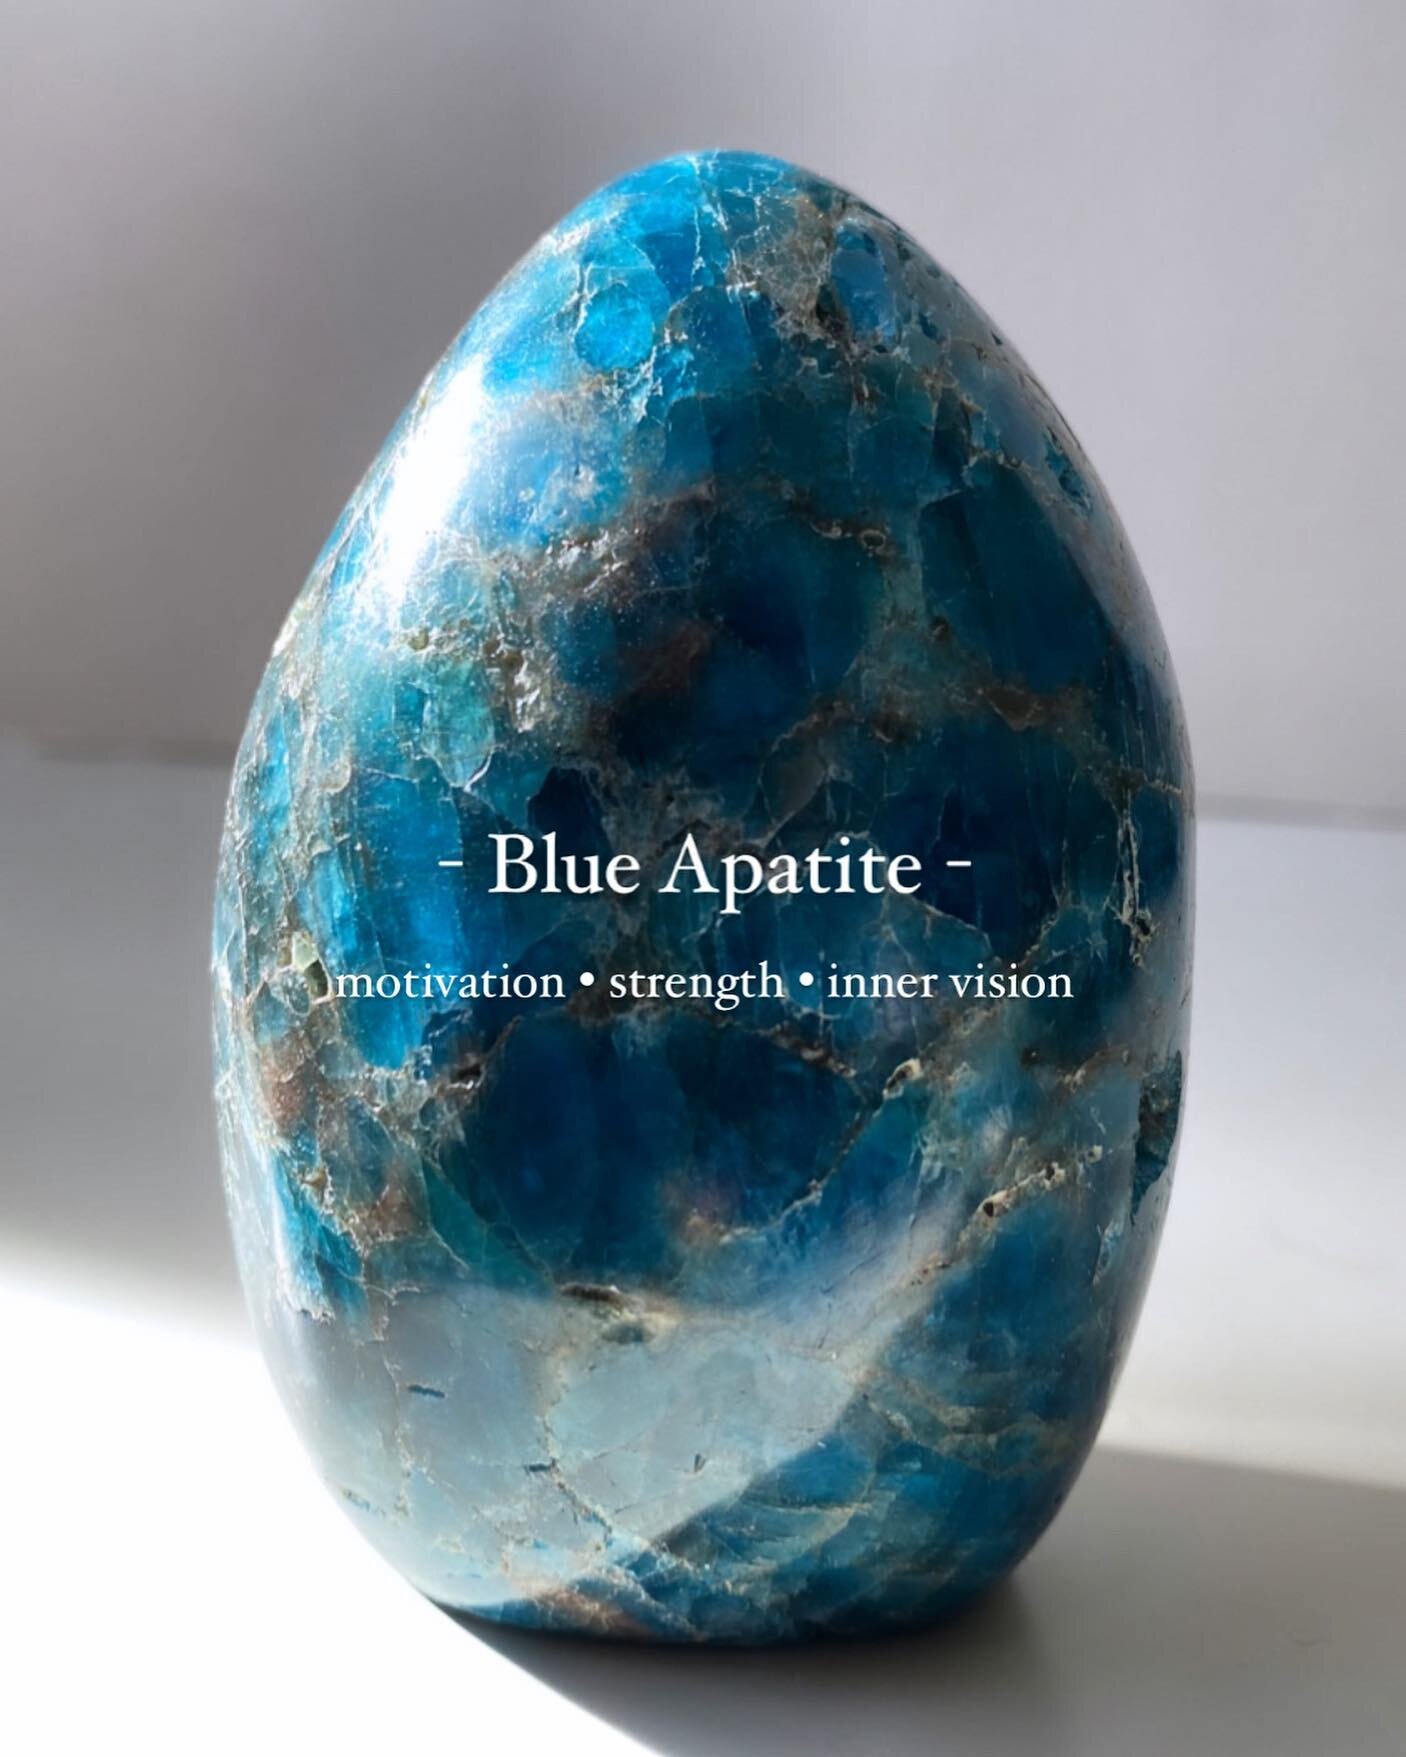 &bull; Apatite is a very interesting gemstone which has a rather unusual connection to humans &ndash; it is made up of calcium and phosphate which happens to be the most common mineral in our bodies. Perhaps this is why it can have such a profound in